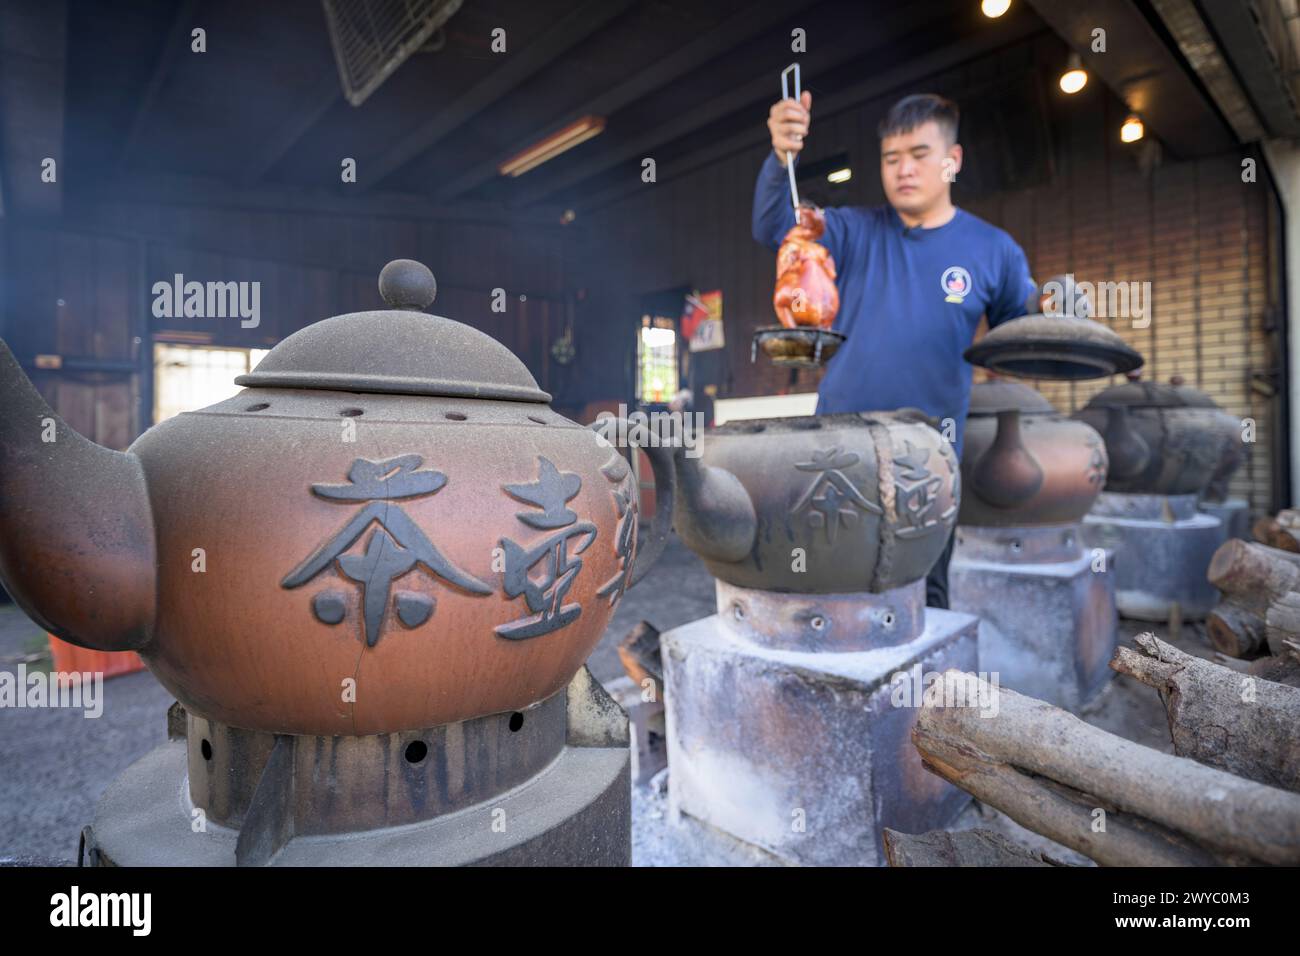 A man cooking a chicken using traditional clay pots over a wood fire Stock Photo